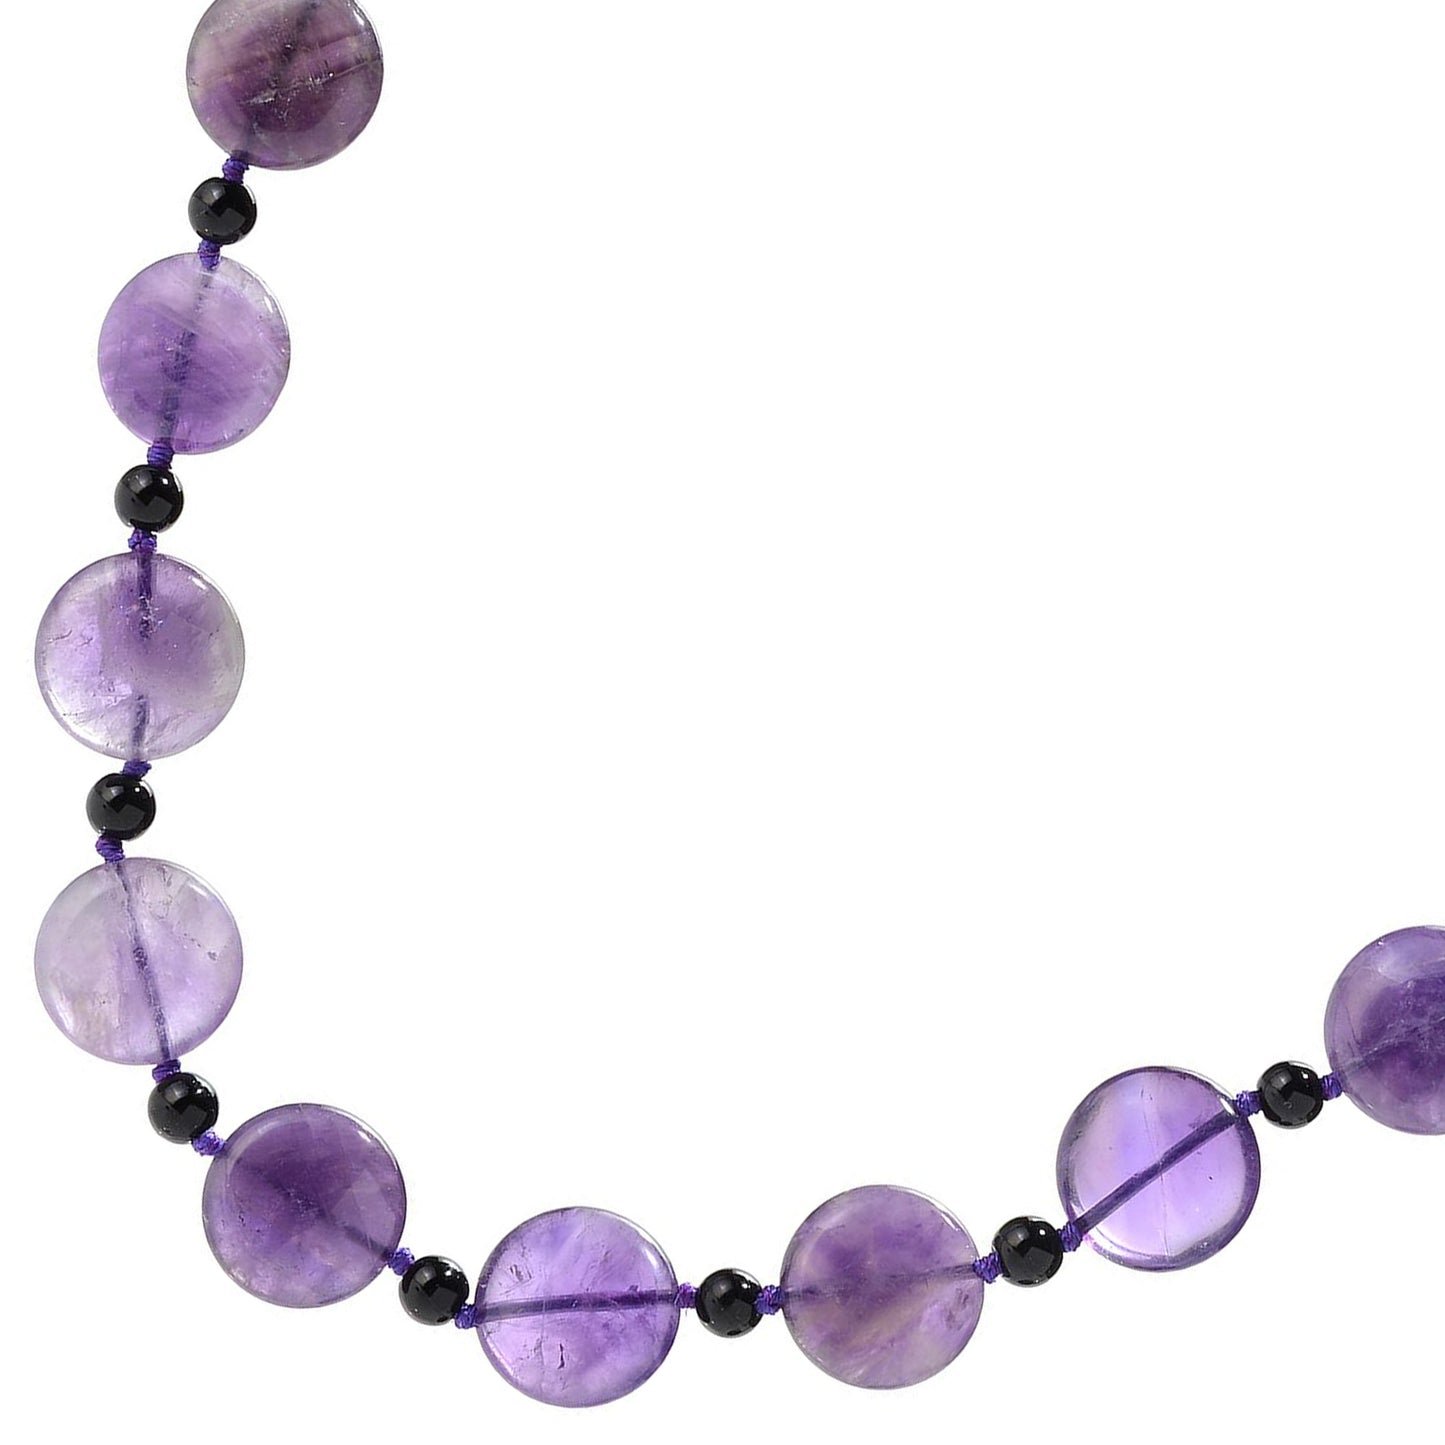 Amethyst Coin Beads Neacklace - Pinctore